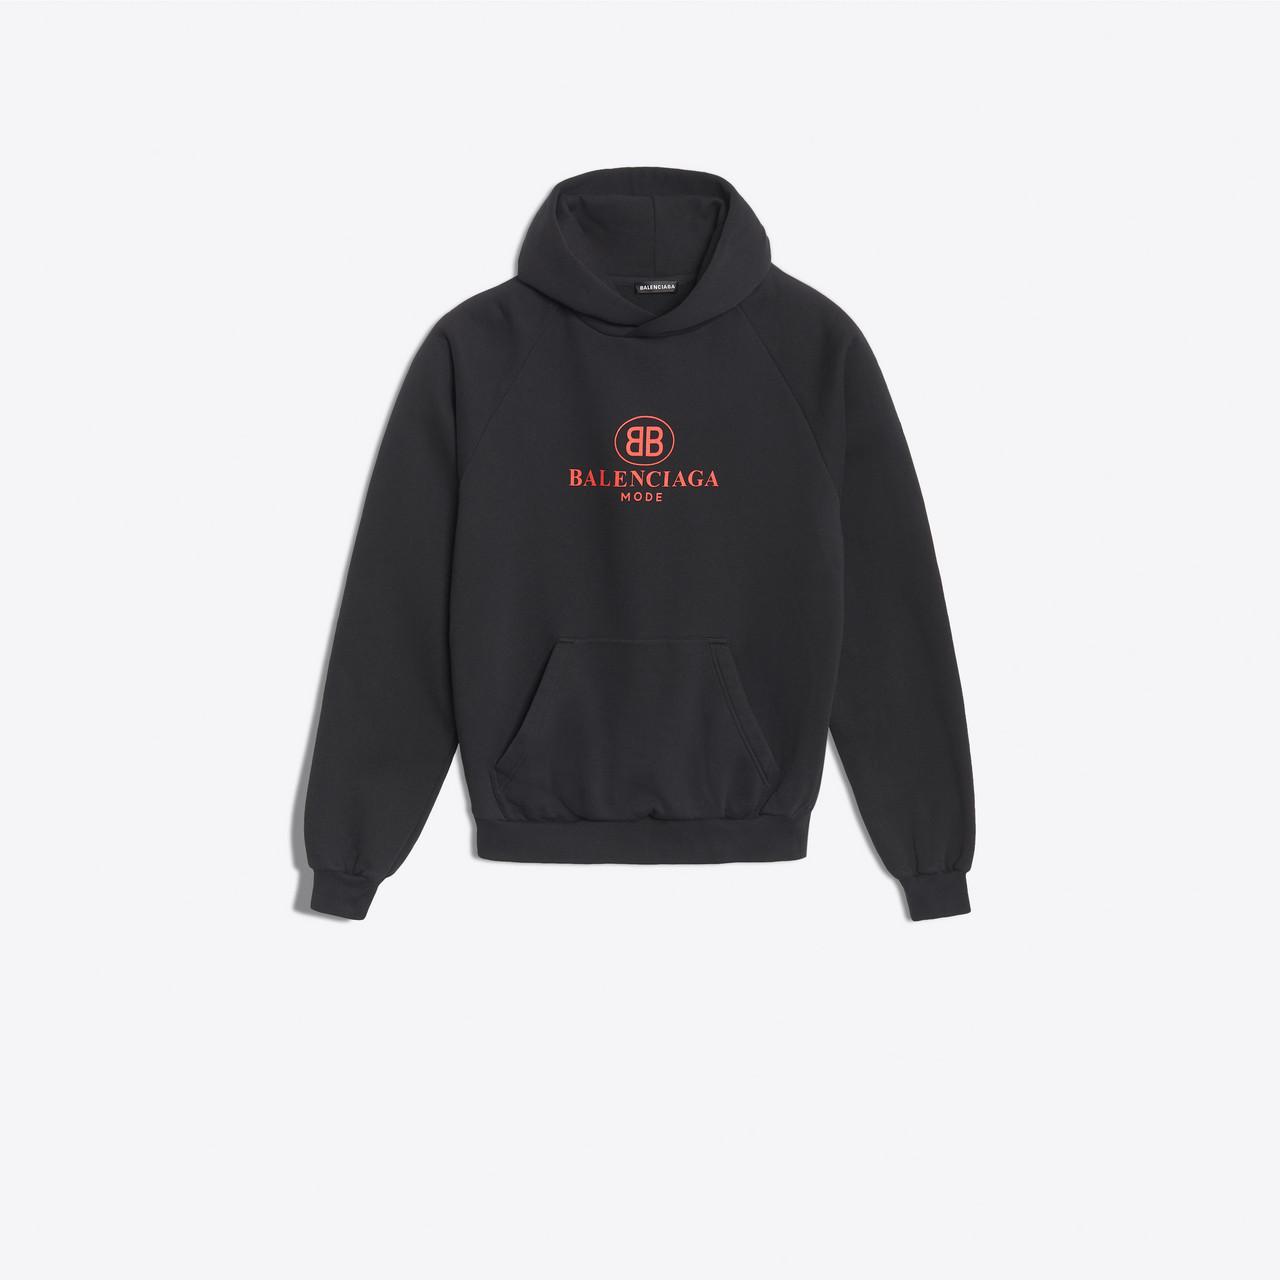 Balenciaga Cotton Bb Mode Hoodie in Black/ Red (Black) for Men - Lyst